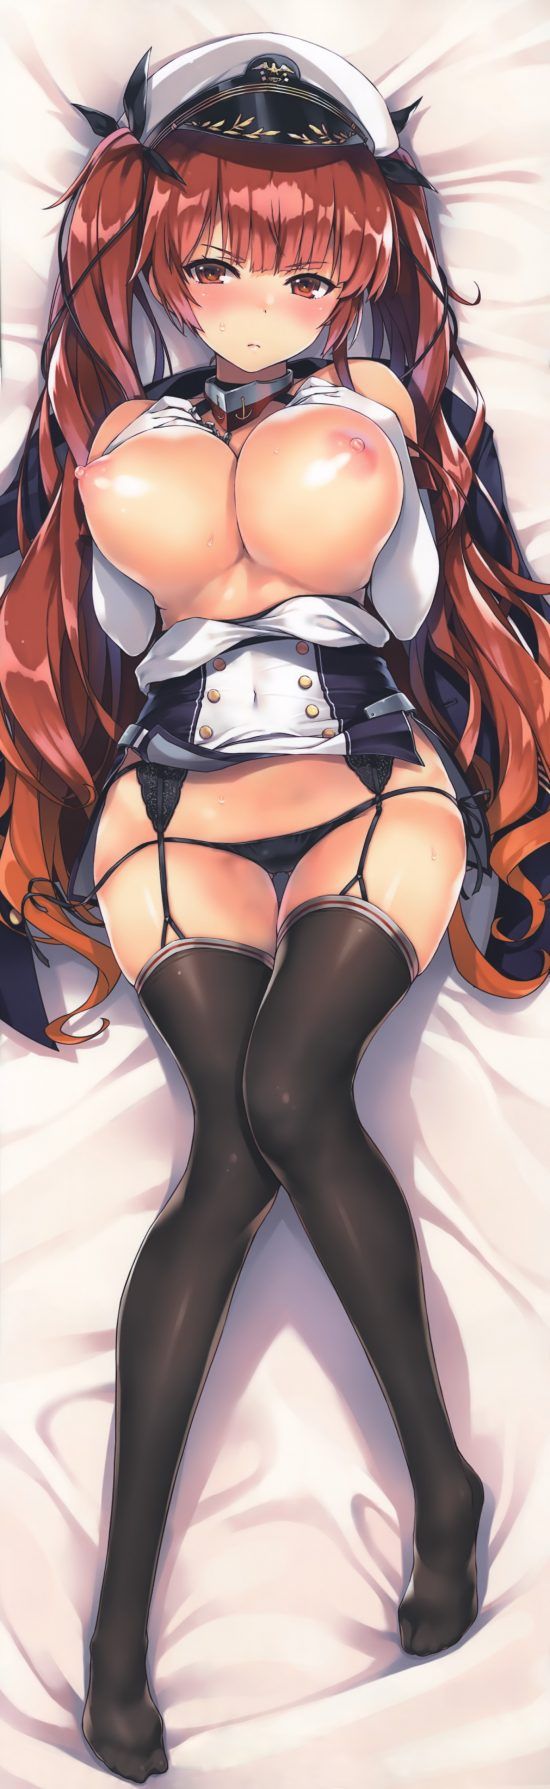 【Secondary Erotic】Here is the erotic image of Honolulu appearing in Azur Lane 18